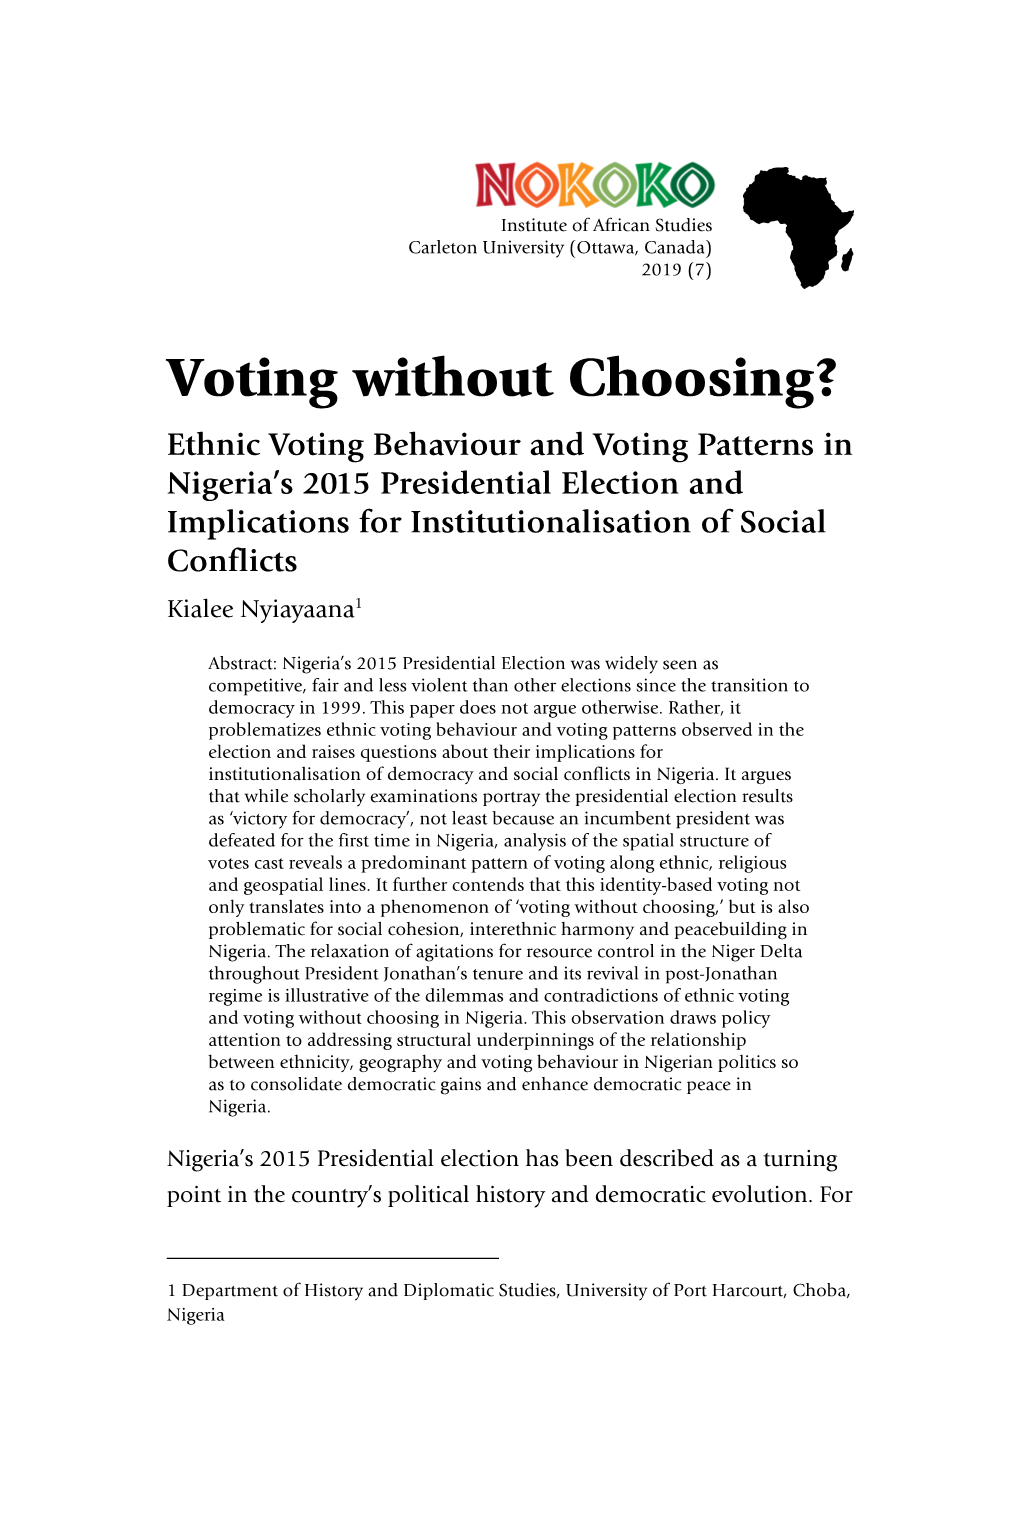 Voting Without Choosing?